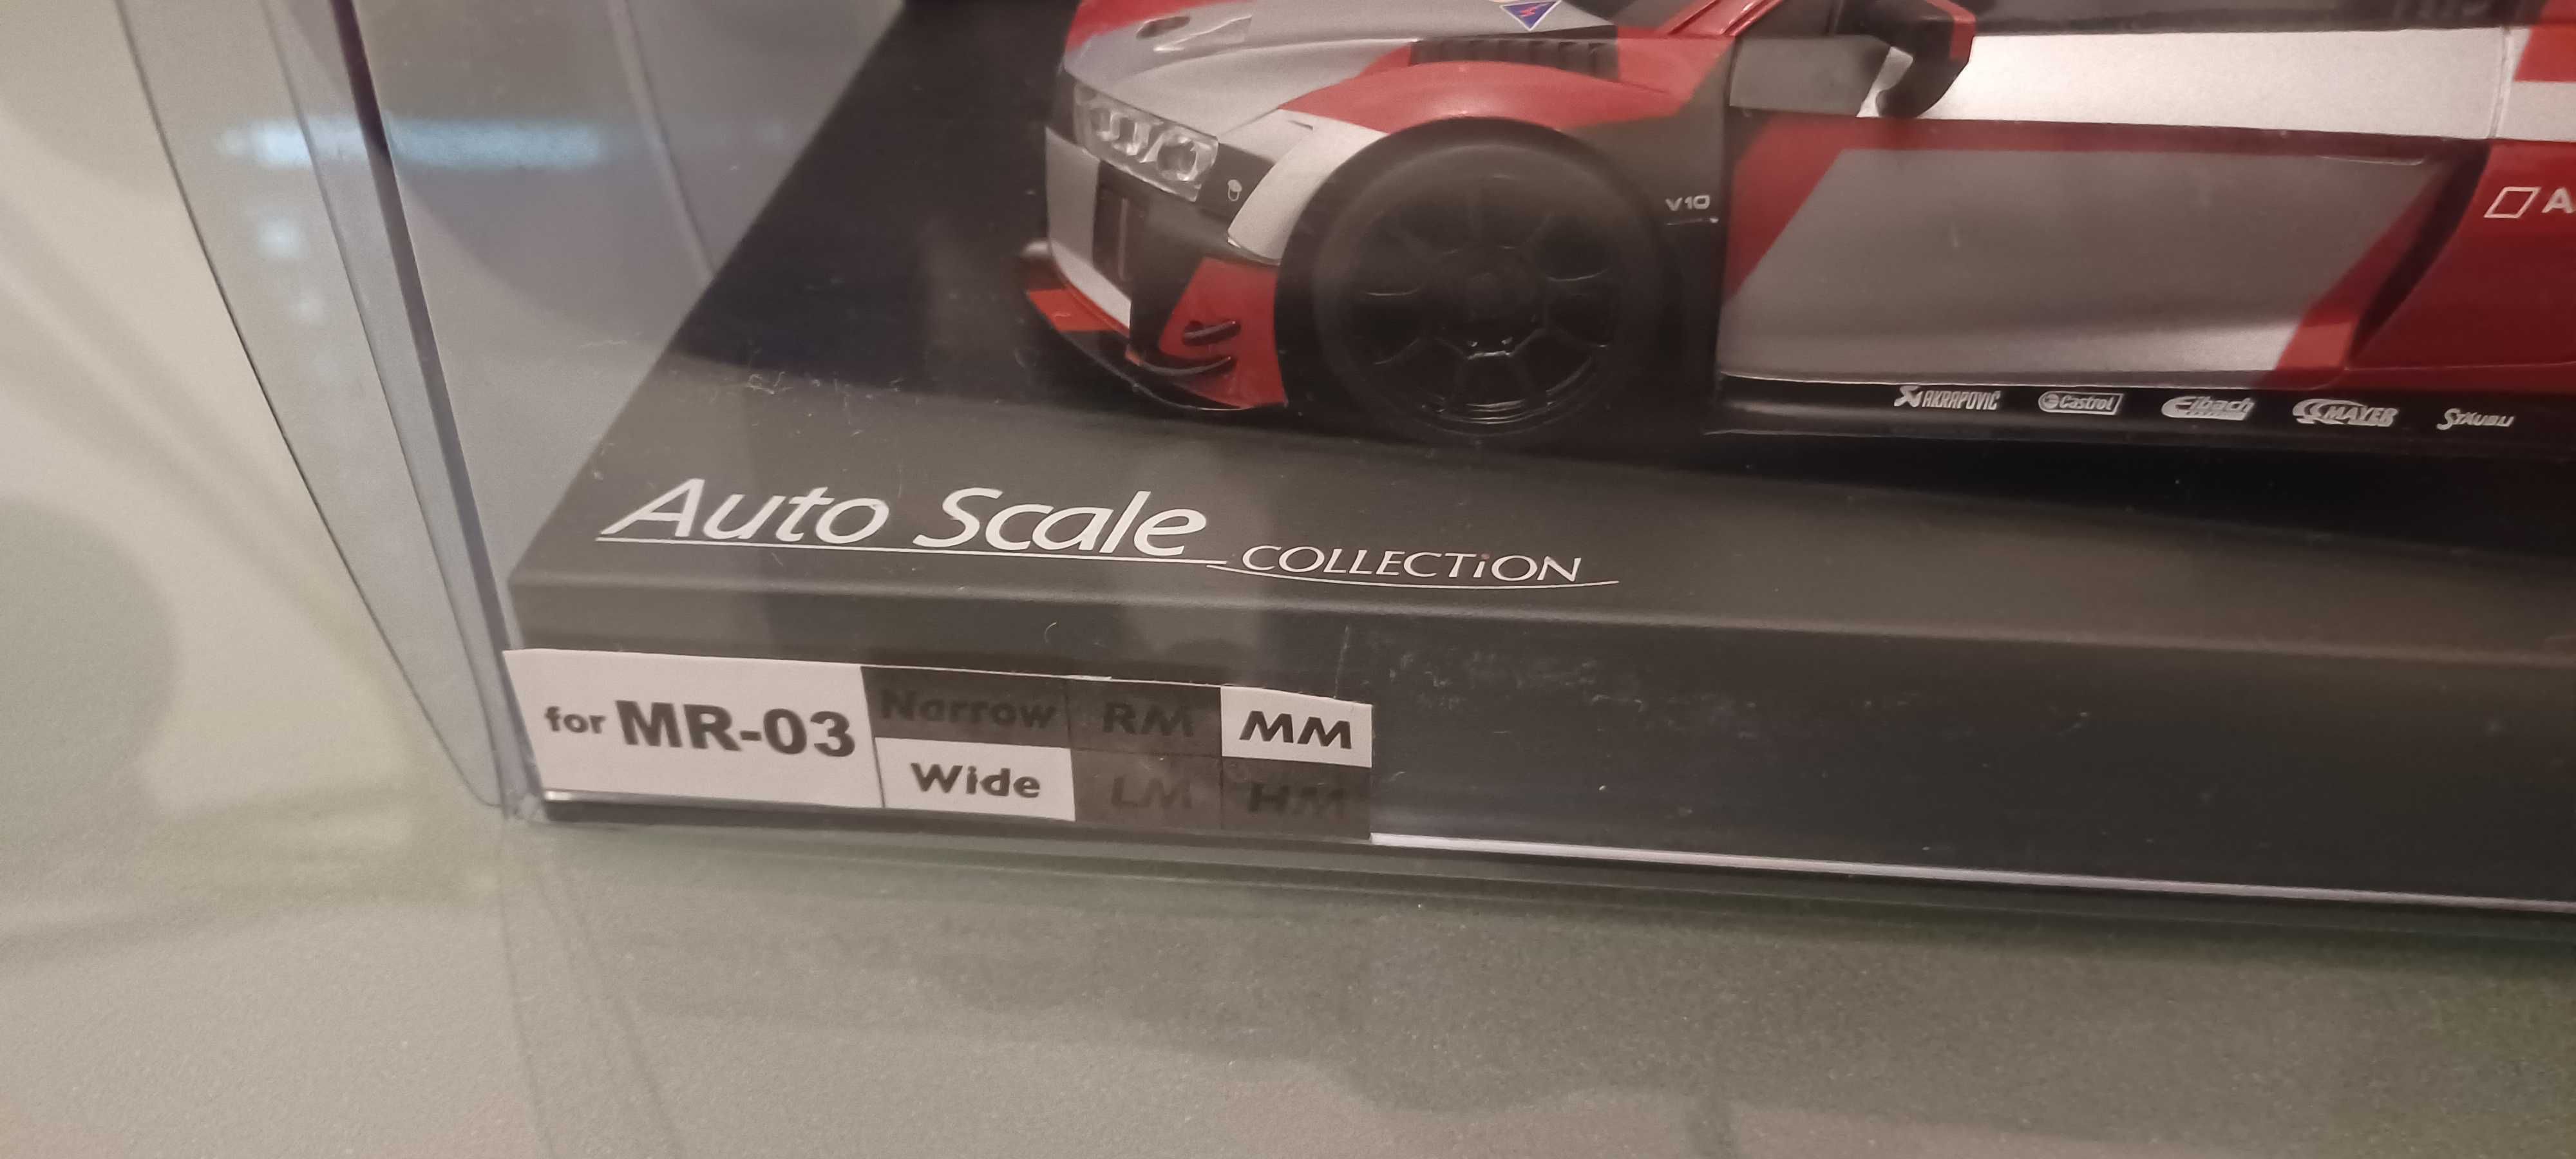 Kyosho Mini-Z Audi R8 LMS 2016 "Gray/Red" - Auto Scale Collection